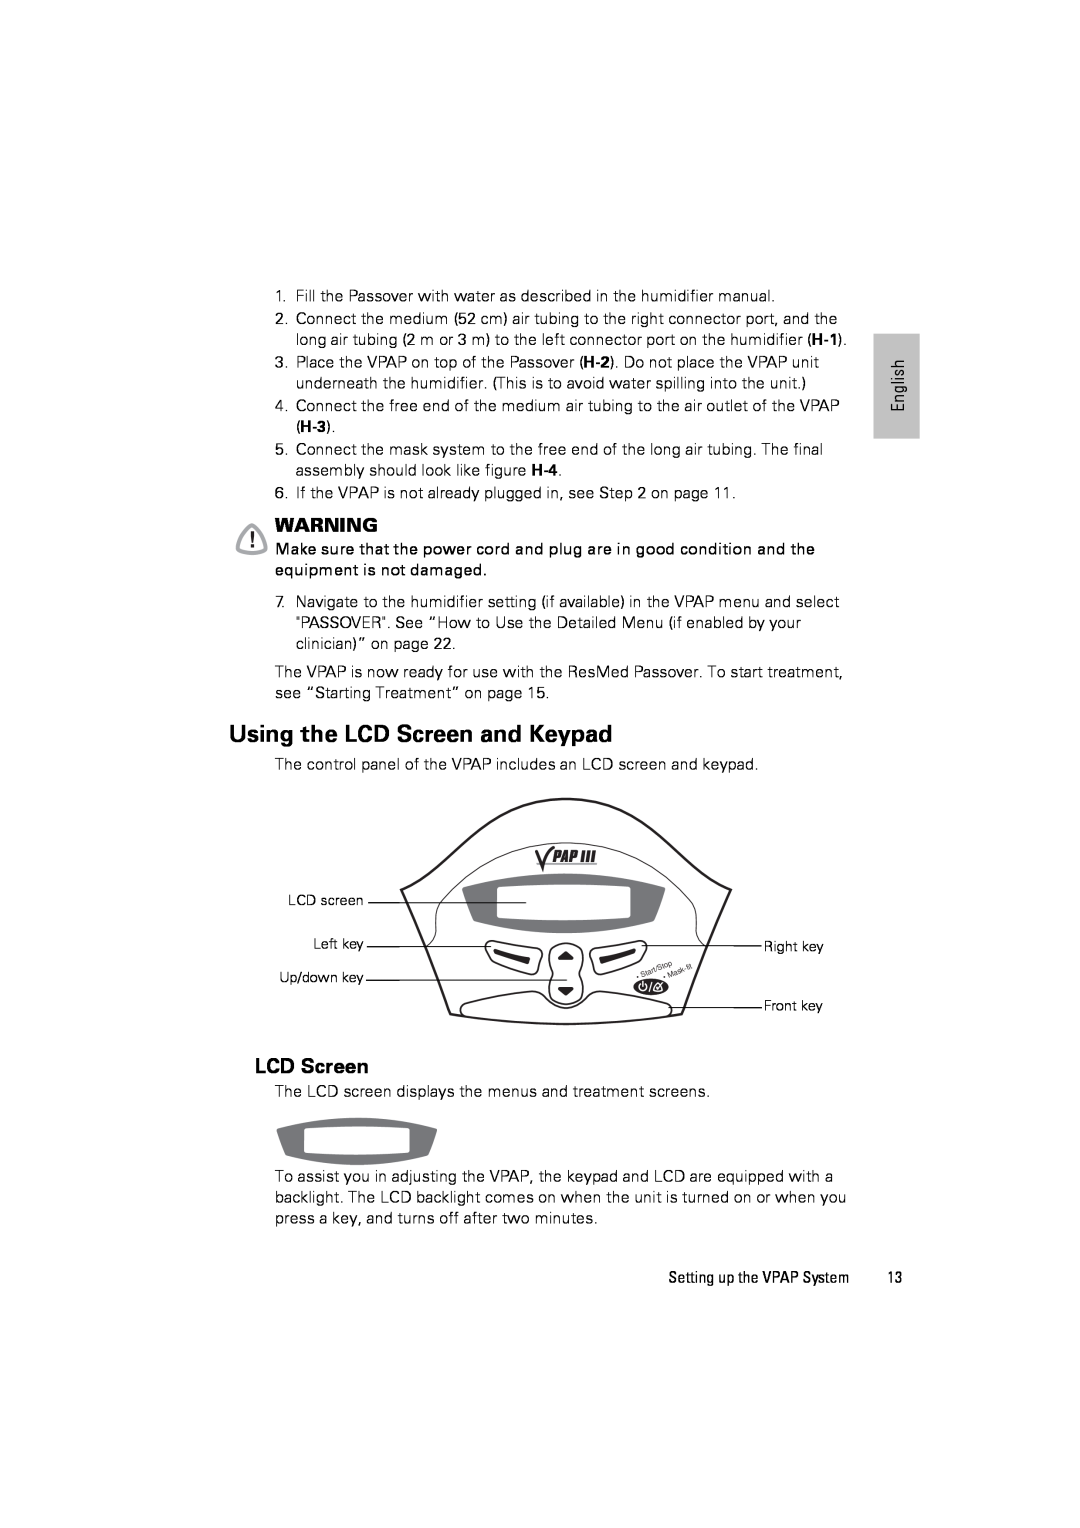 ResMed III & III ST user manual Using the LCD Screen and Keypad 